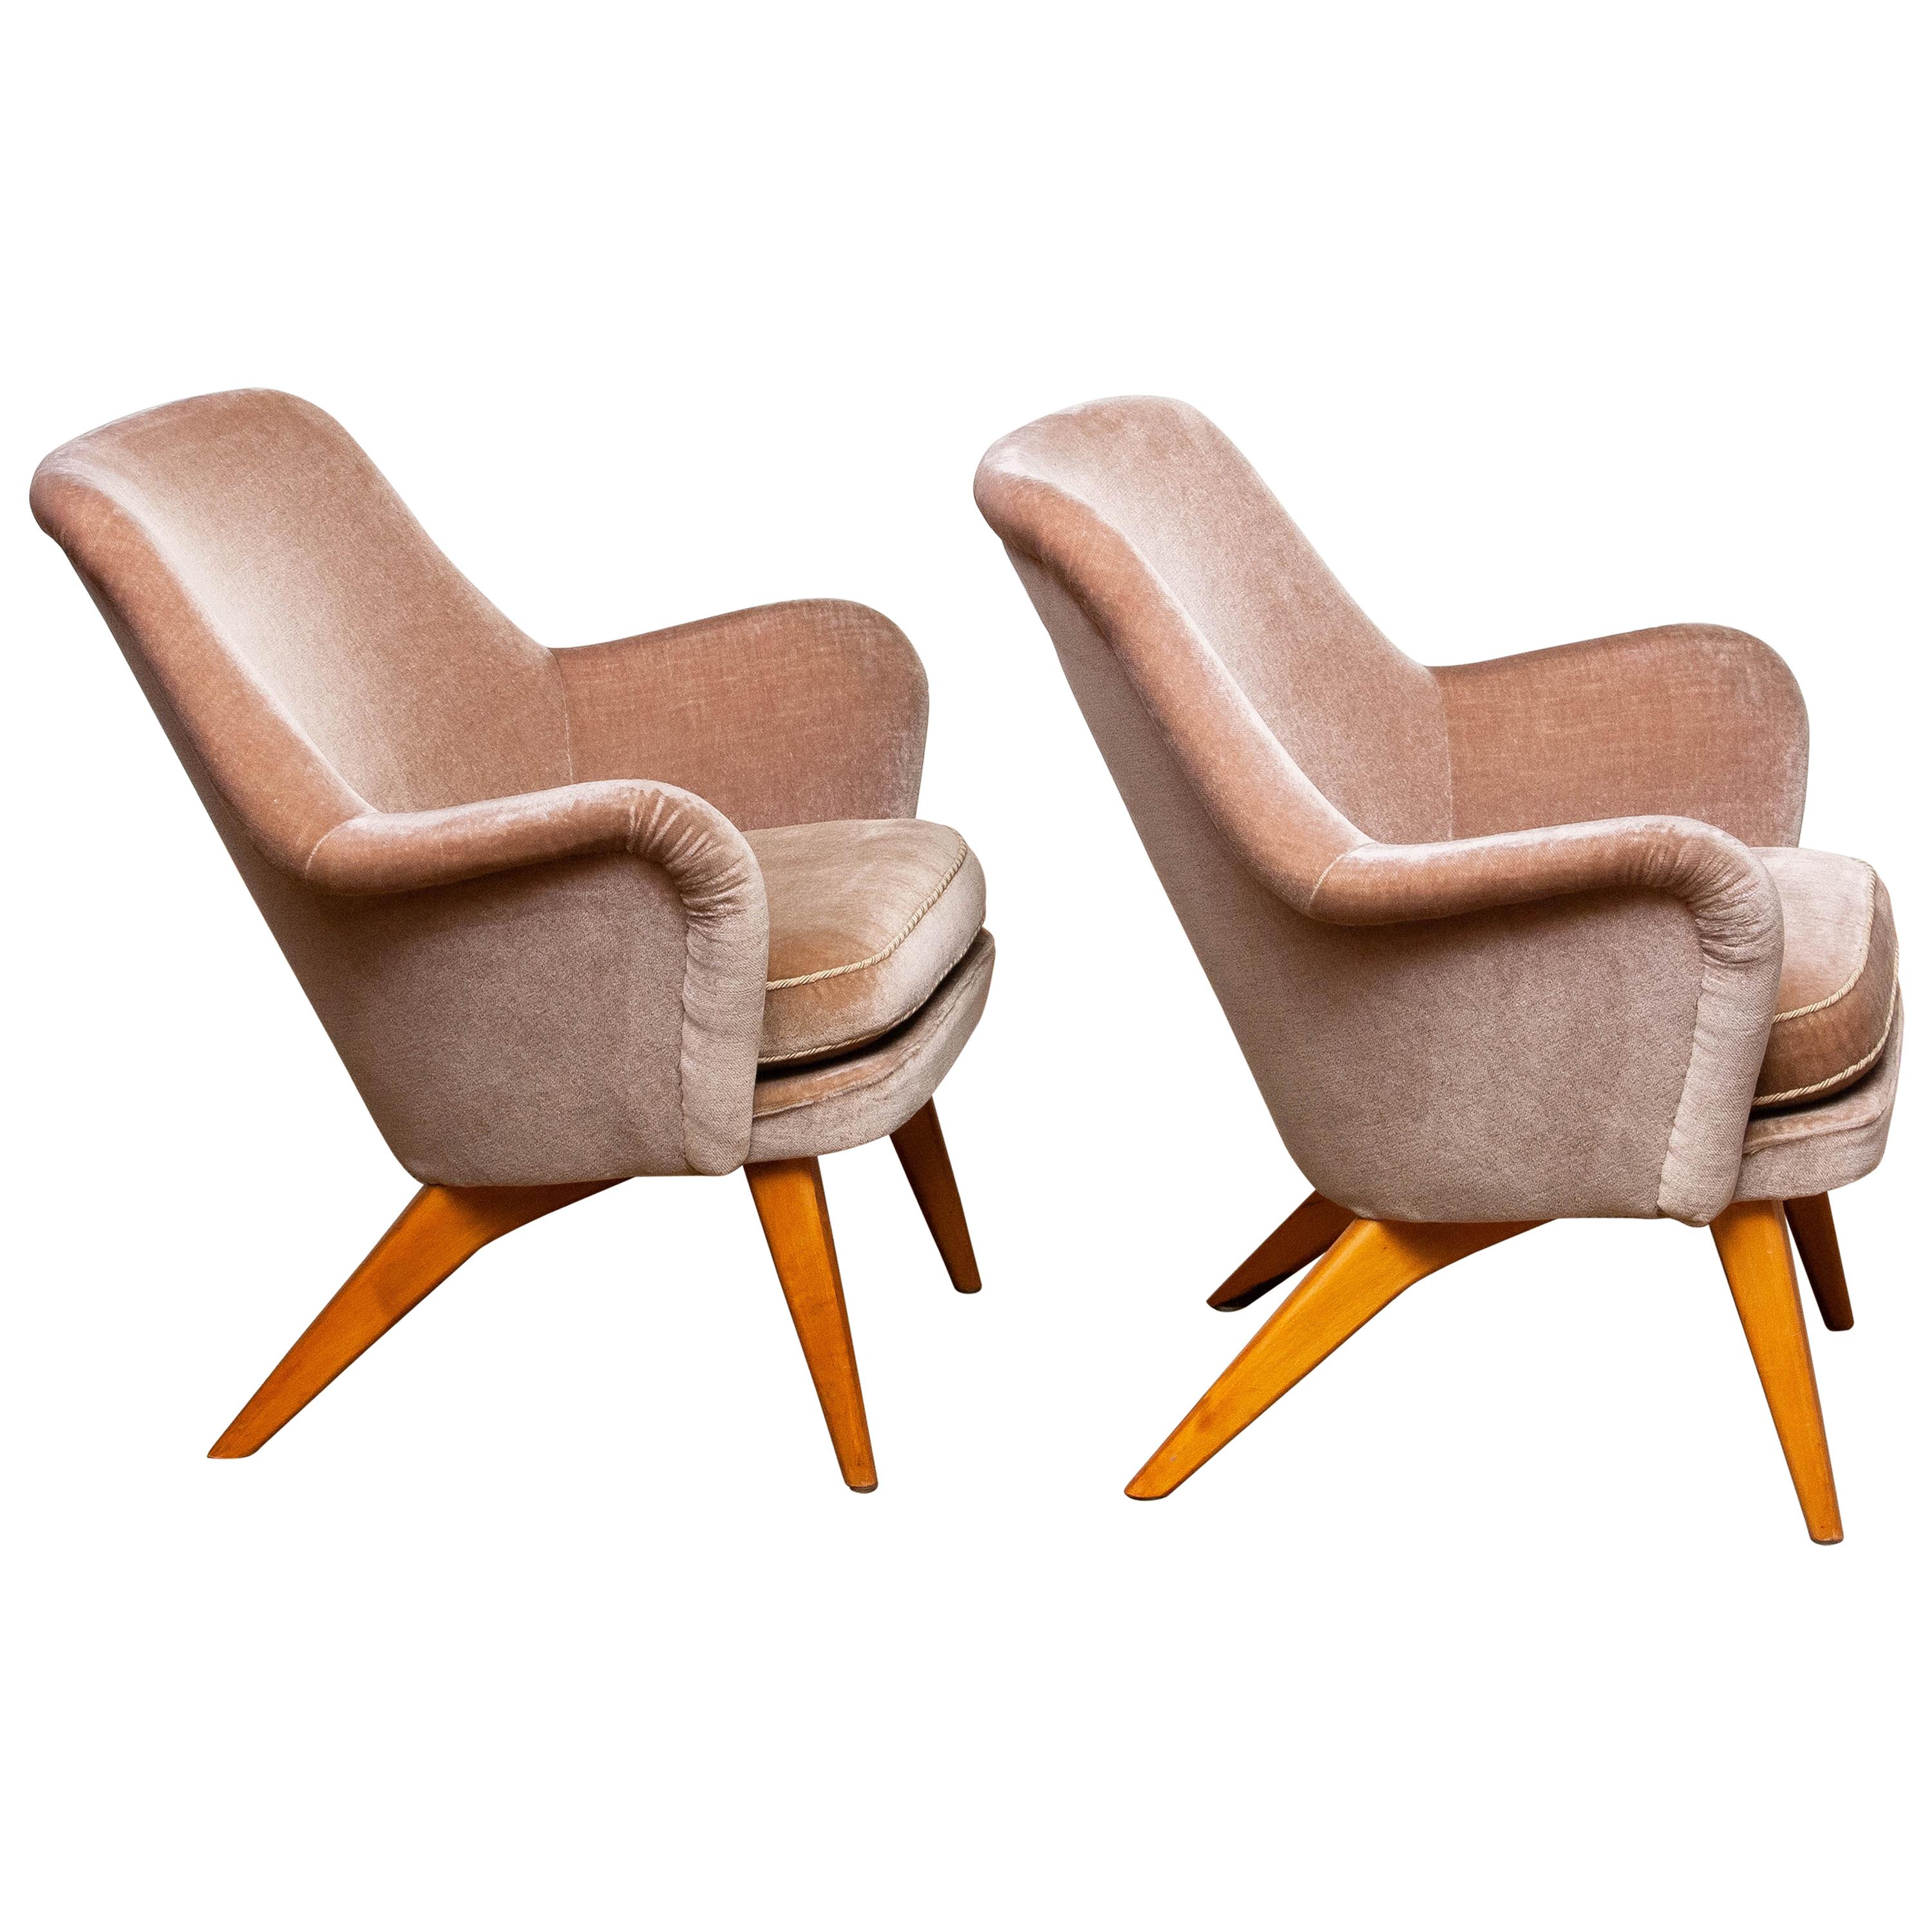 Finnish 1950s Pair of Chairs by Carl Gustav Hiort af Ornäs for Puunveisto Oy-Trasnideri